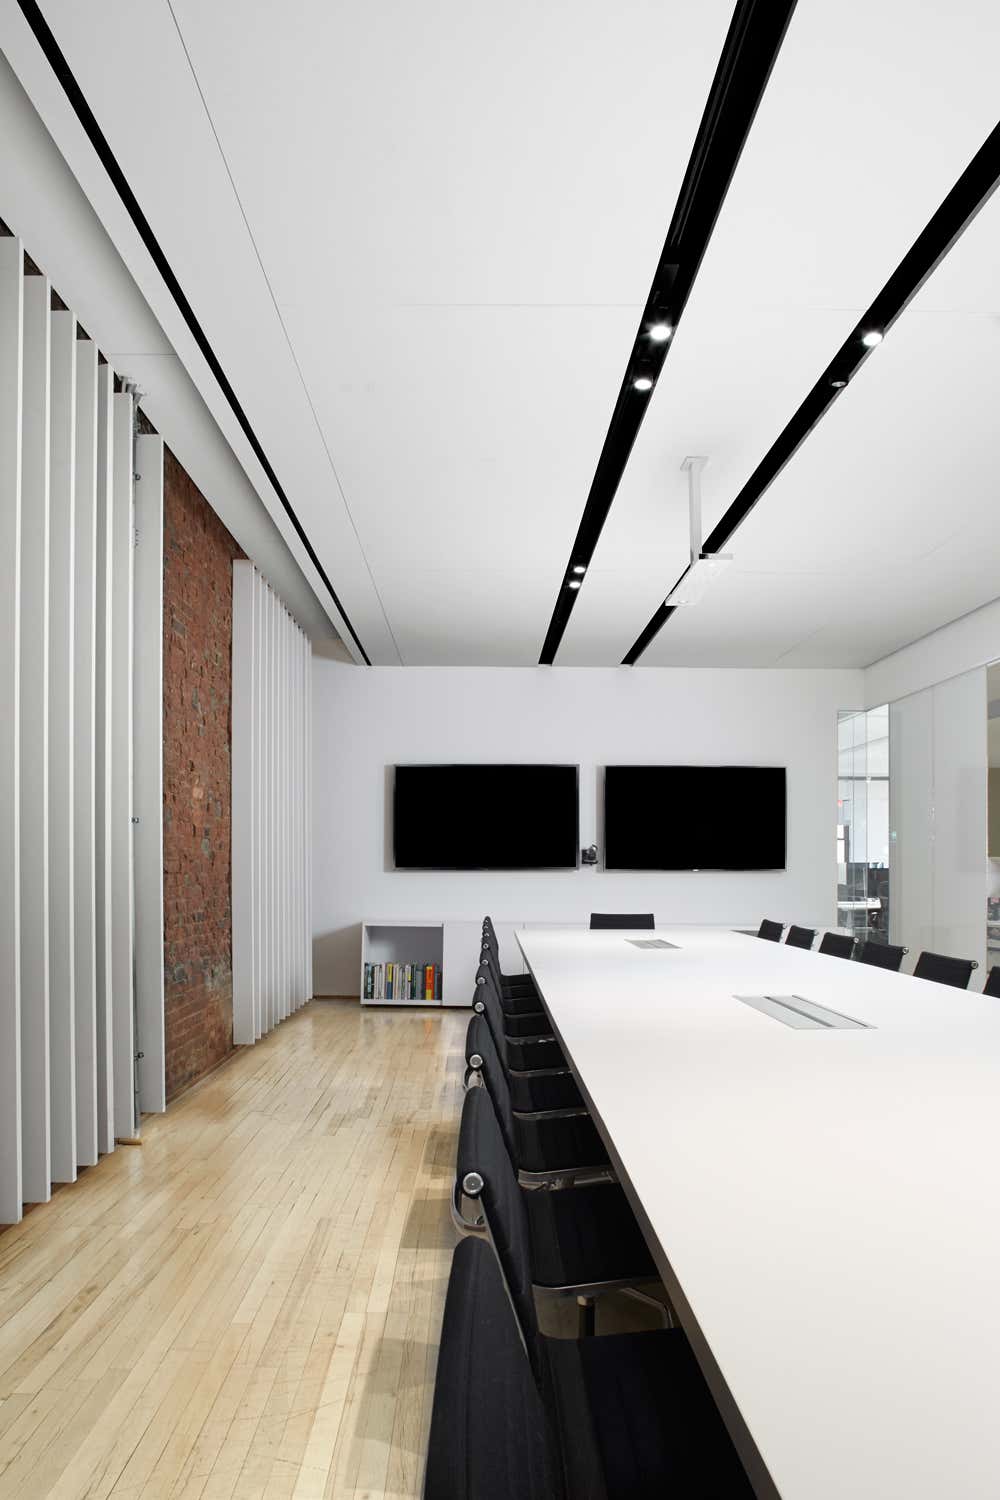 Contemporary Meeting Room